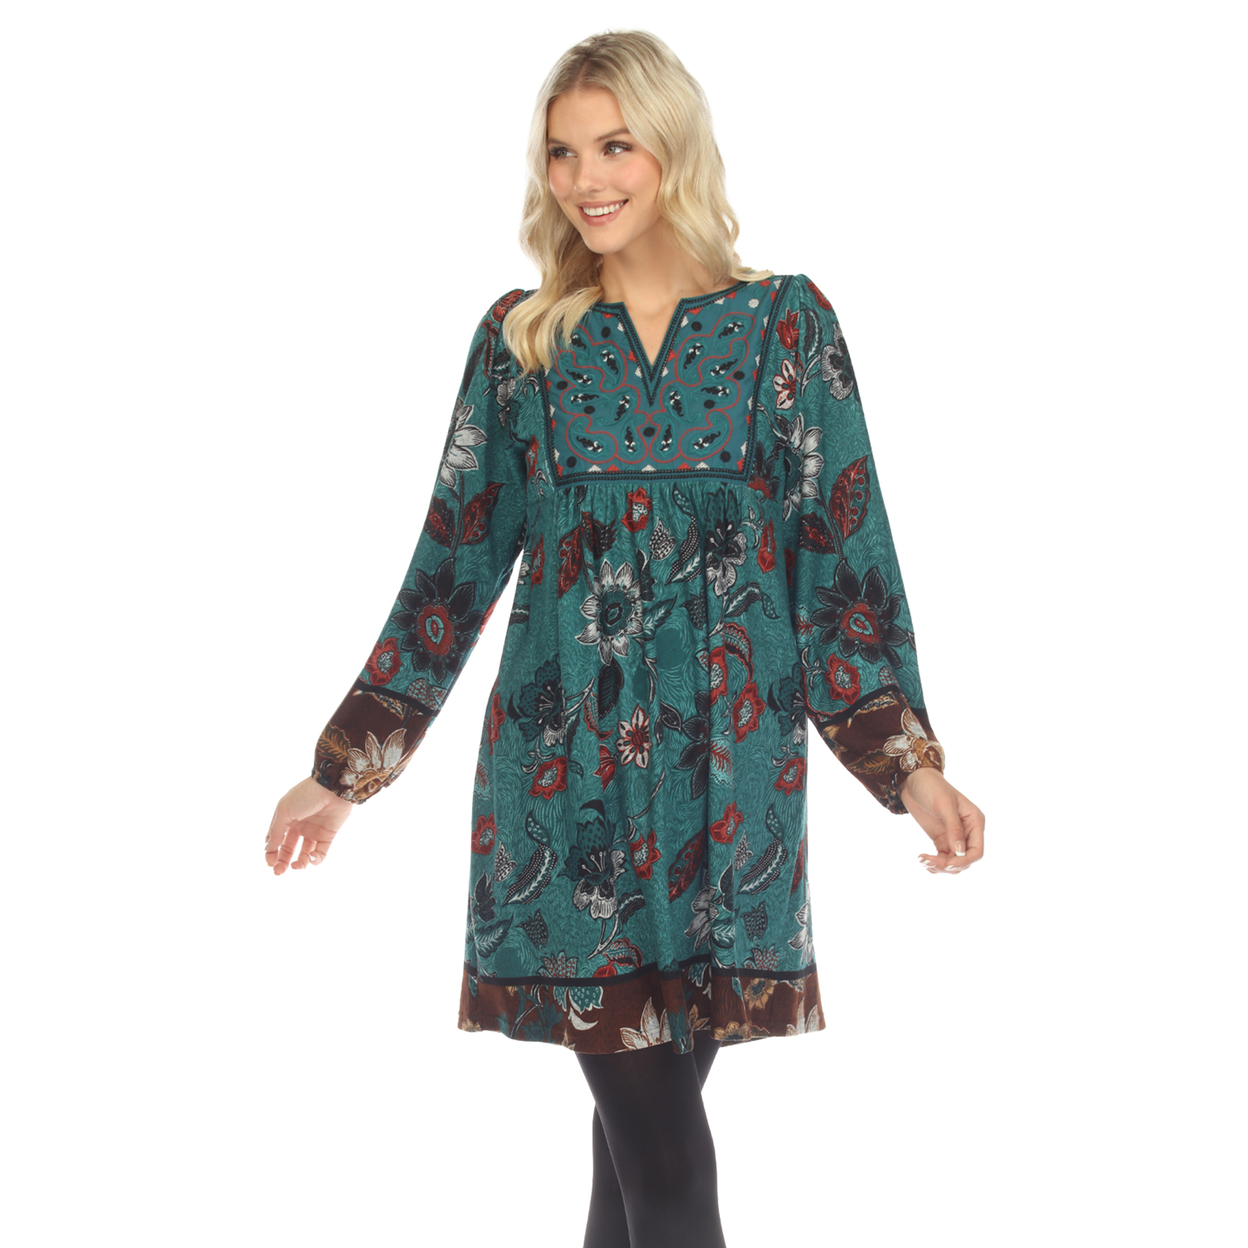 White Mark Women's Floral Paisley Sweater Dress - Teal, Large